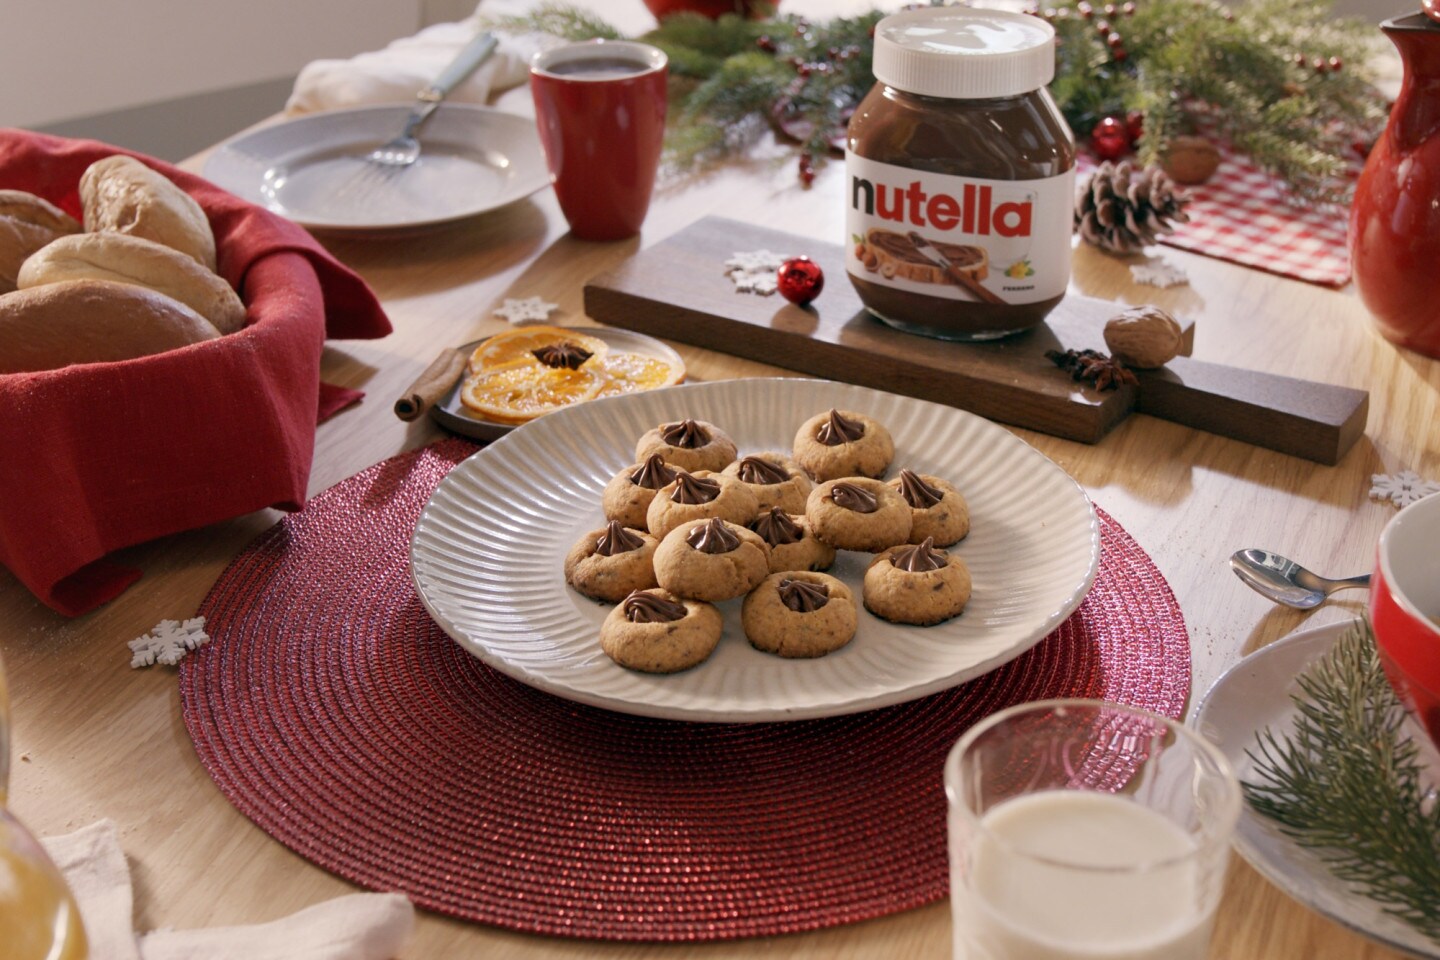 thumbprint_cookies_by_nutella_recipe_pos_page_details_italia